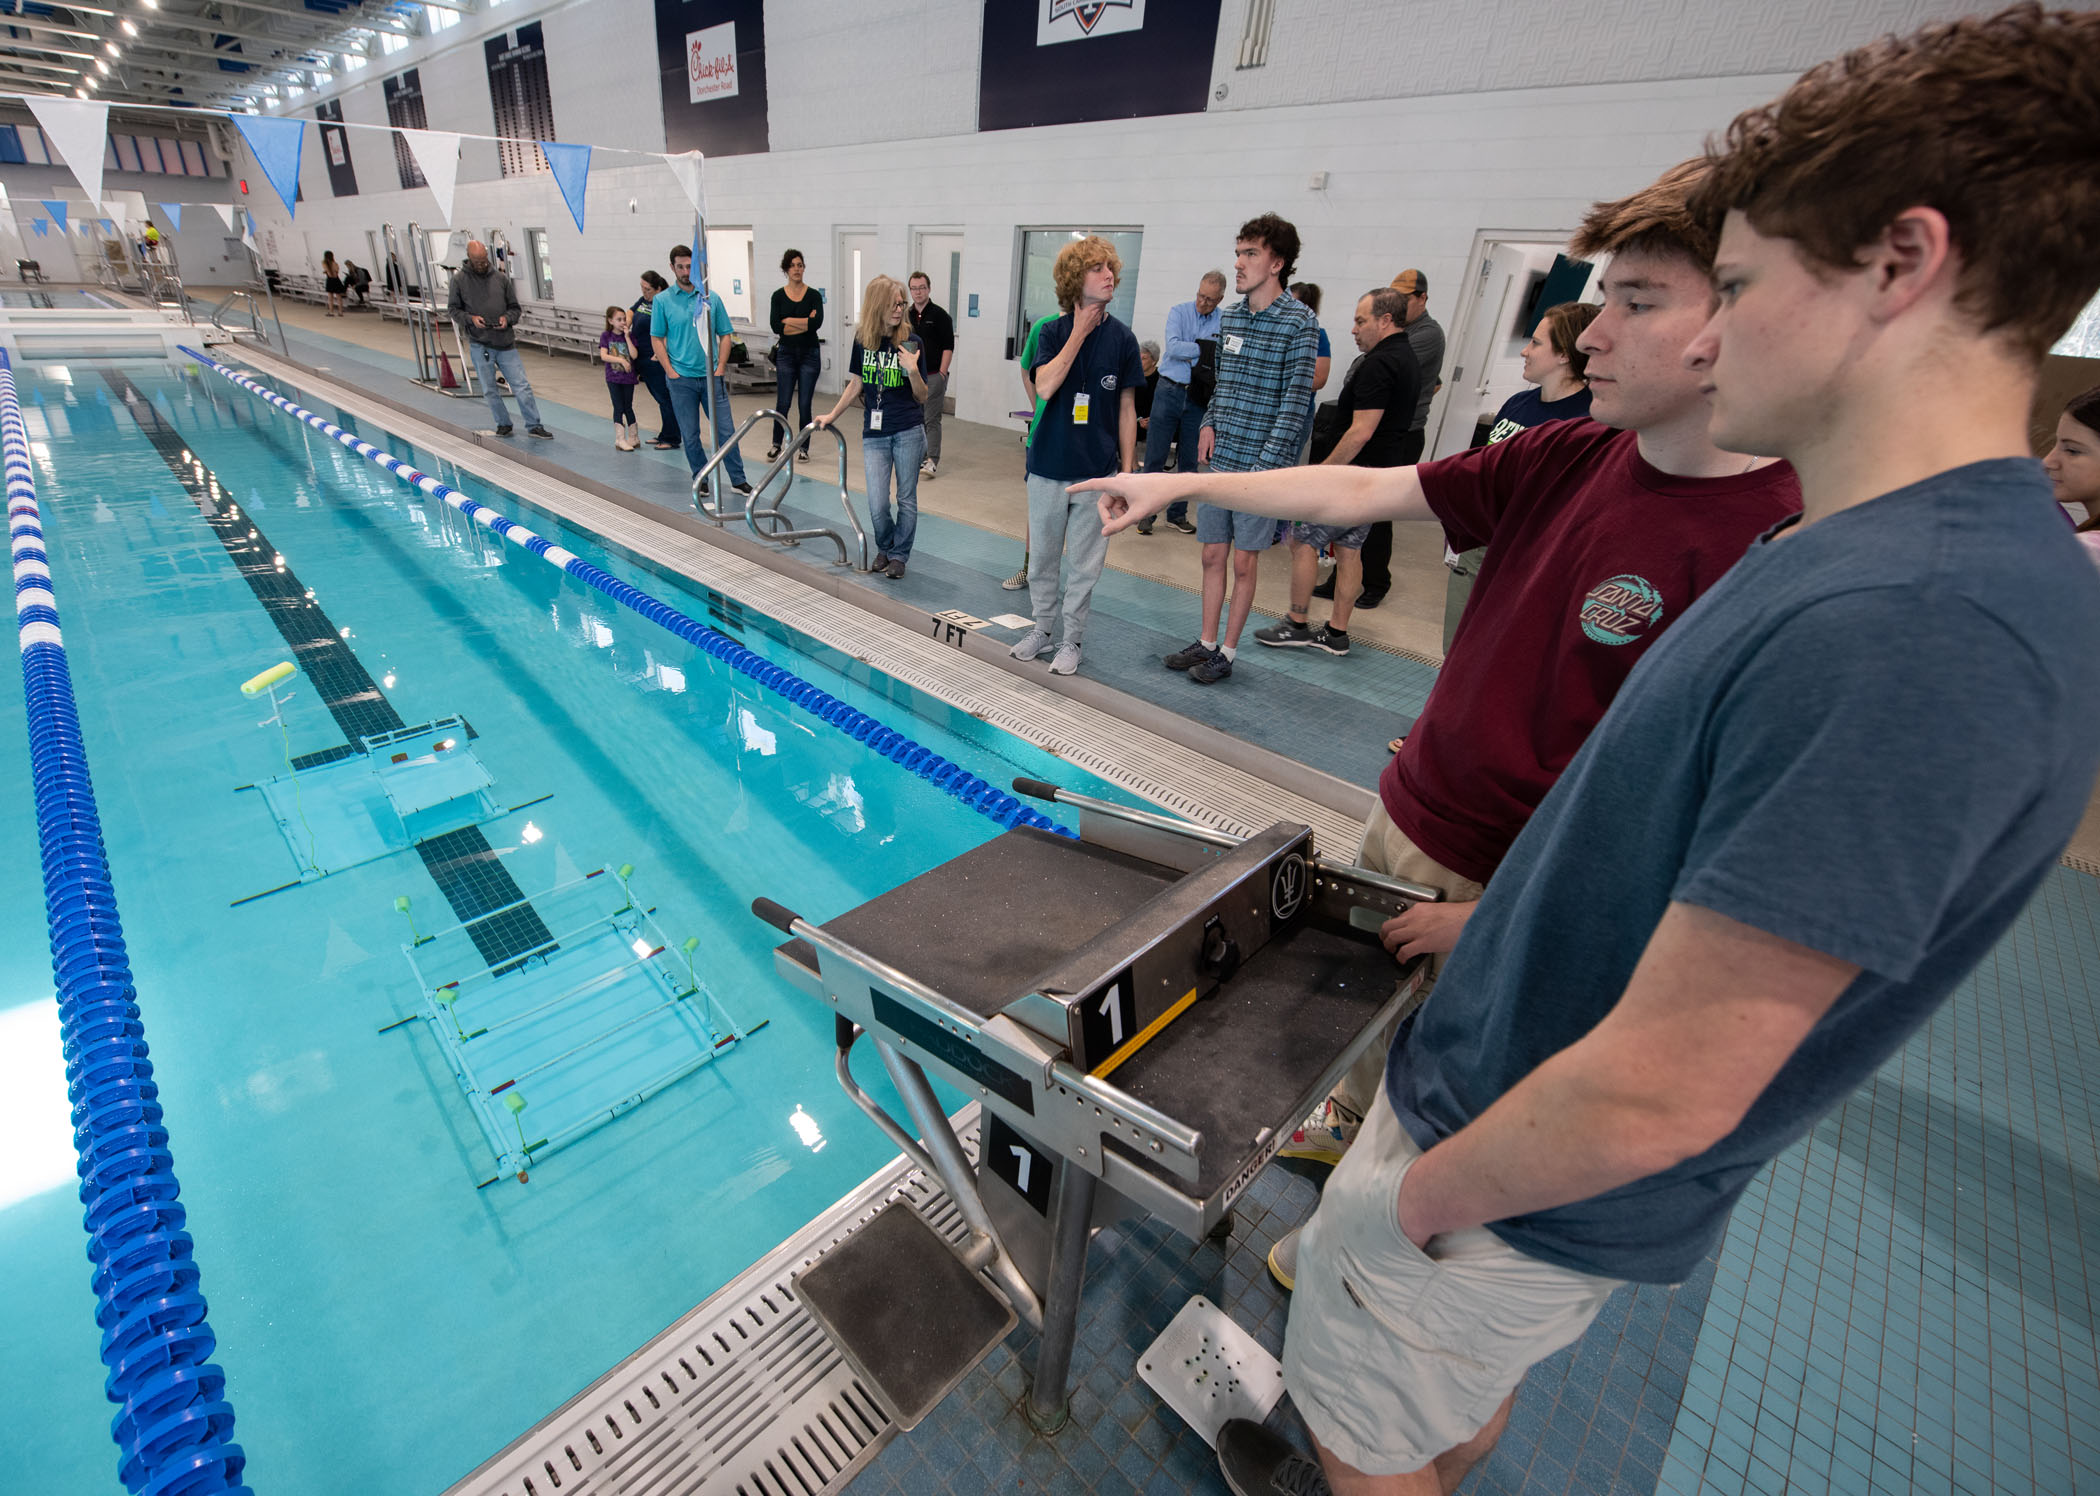 Photos of the Regional SeaPerch Competition at North Charleston Acquatic Center